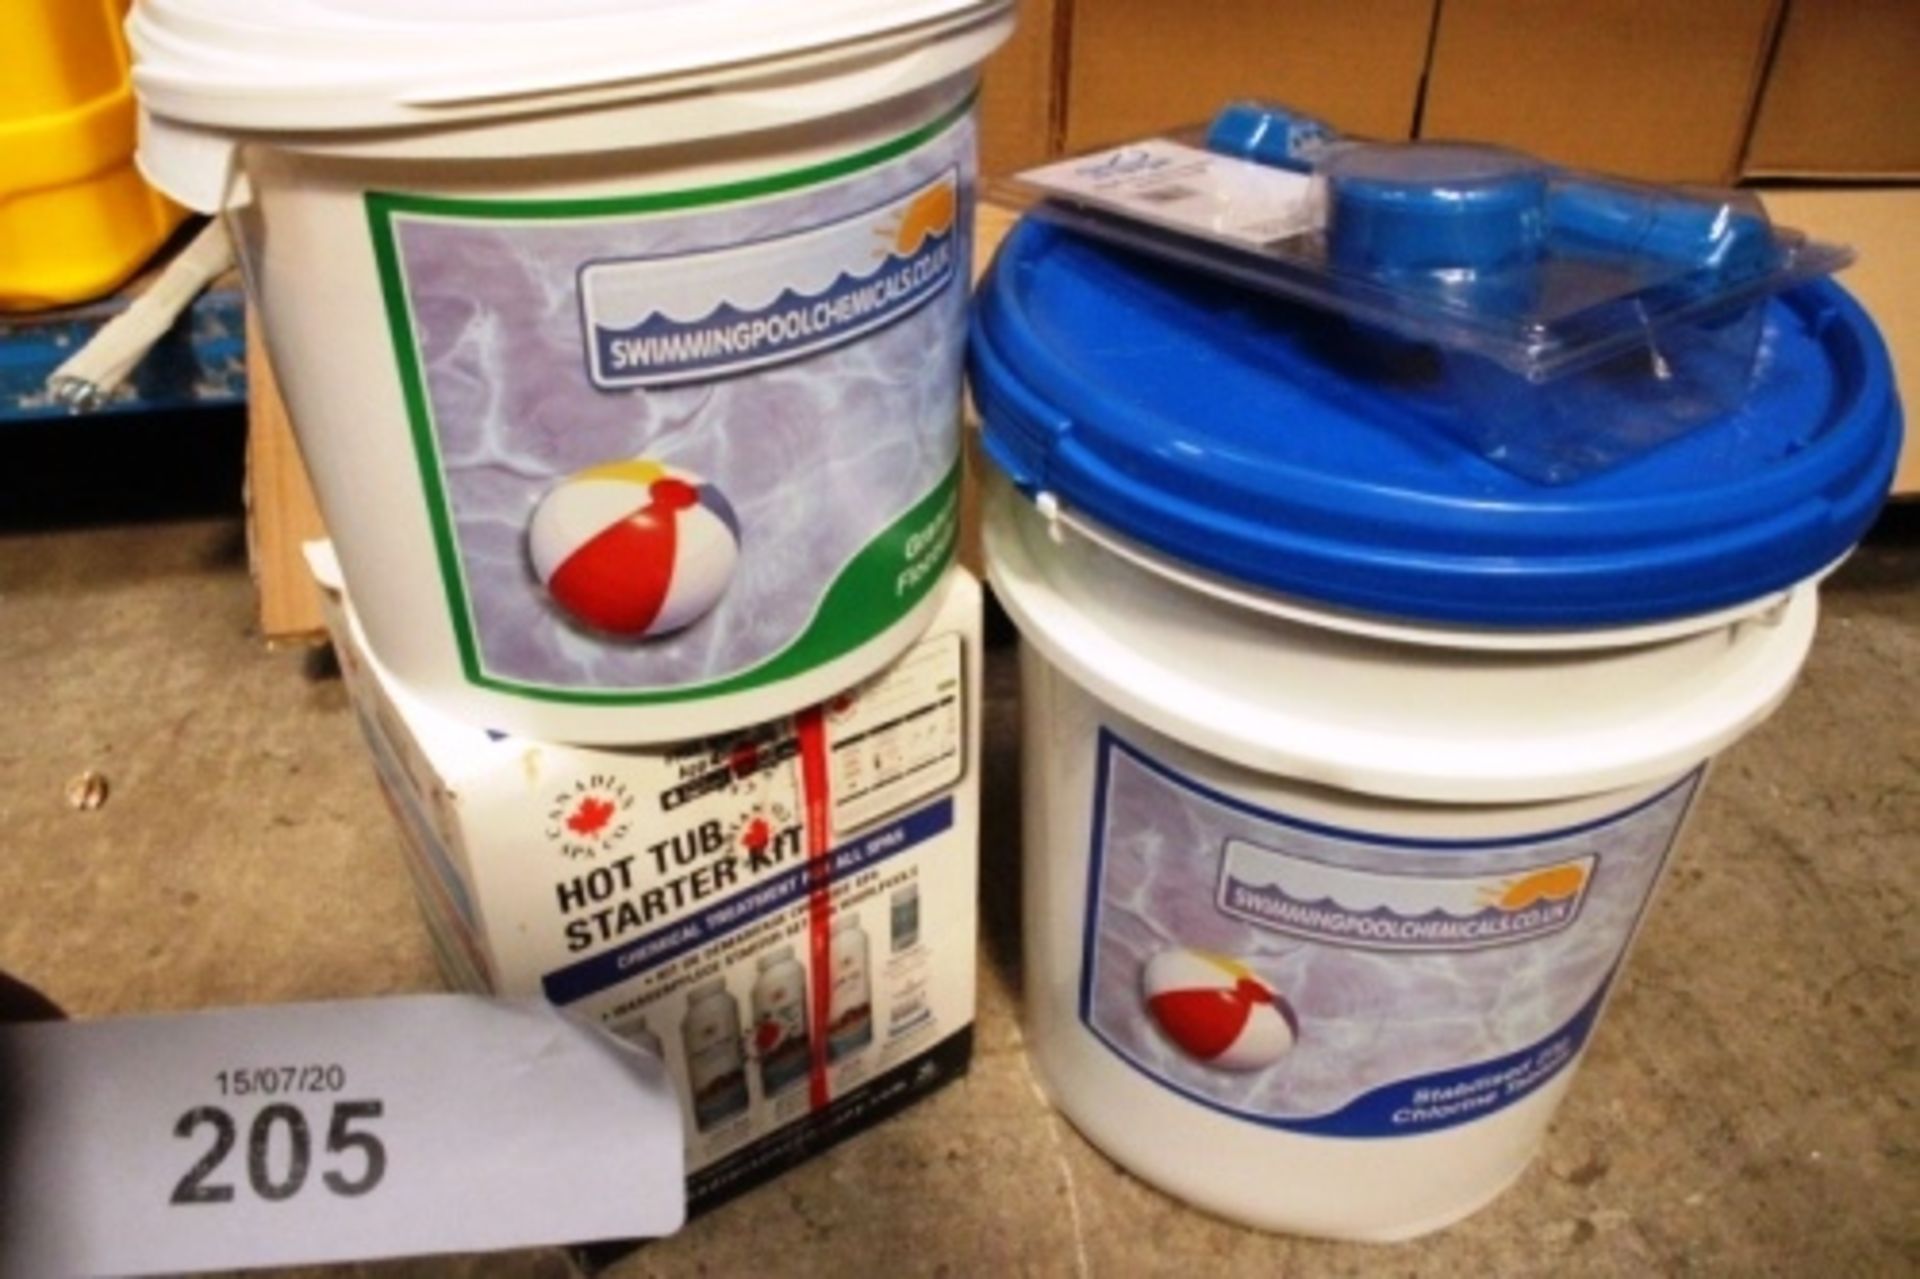 A Canadian Spa Co hot tub starter kit, a 5kg tub of swimming pool granular flocculant, a 10kg tub of